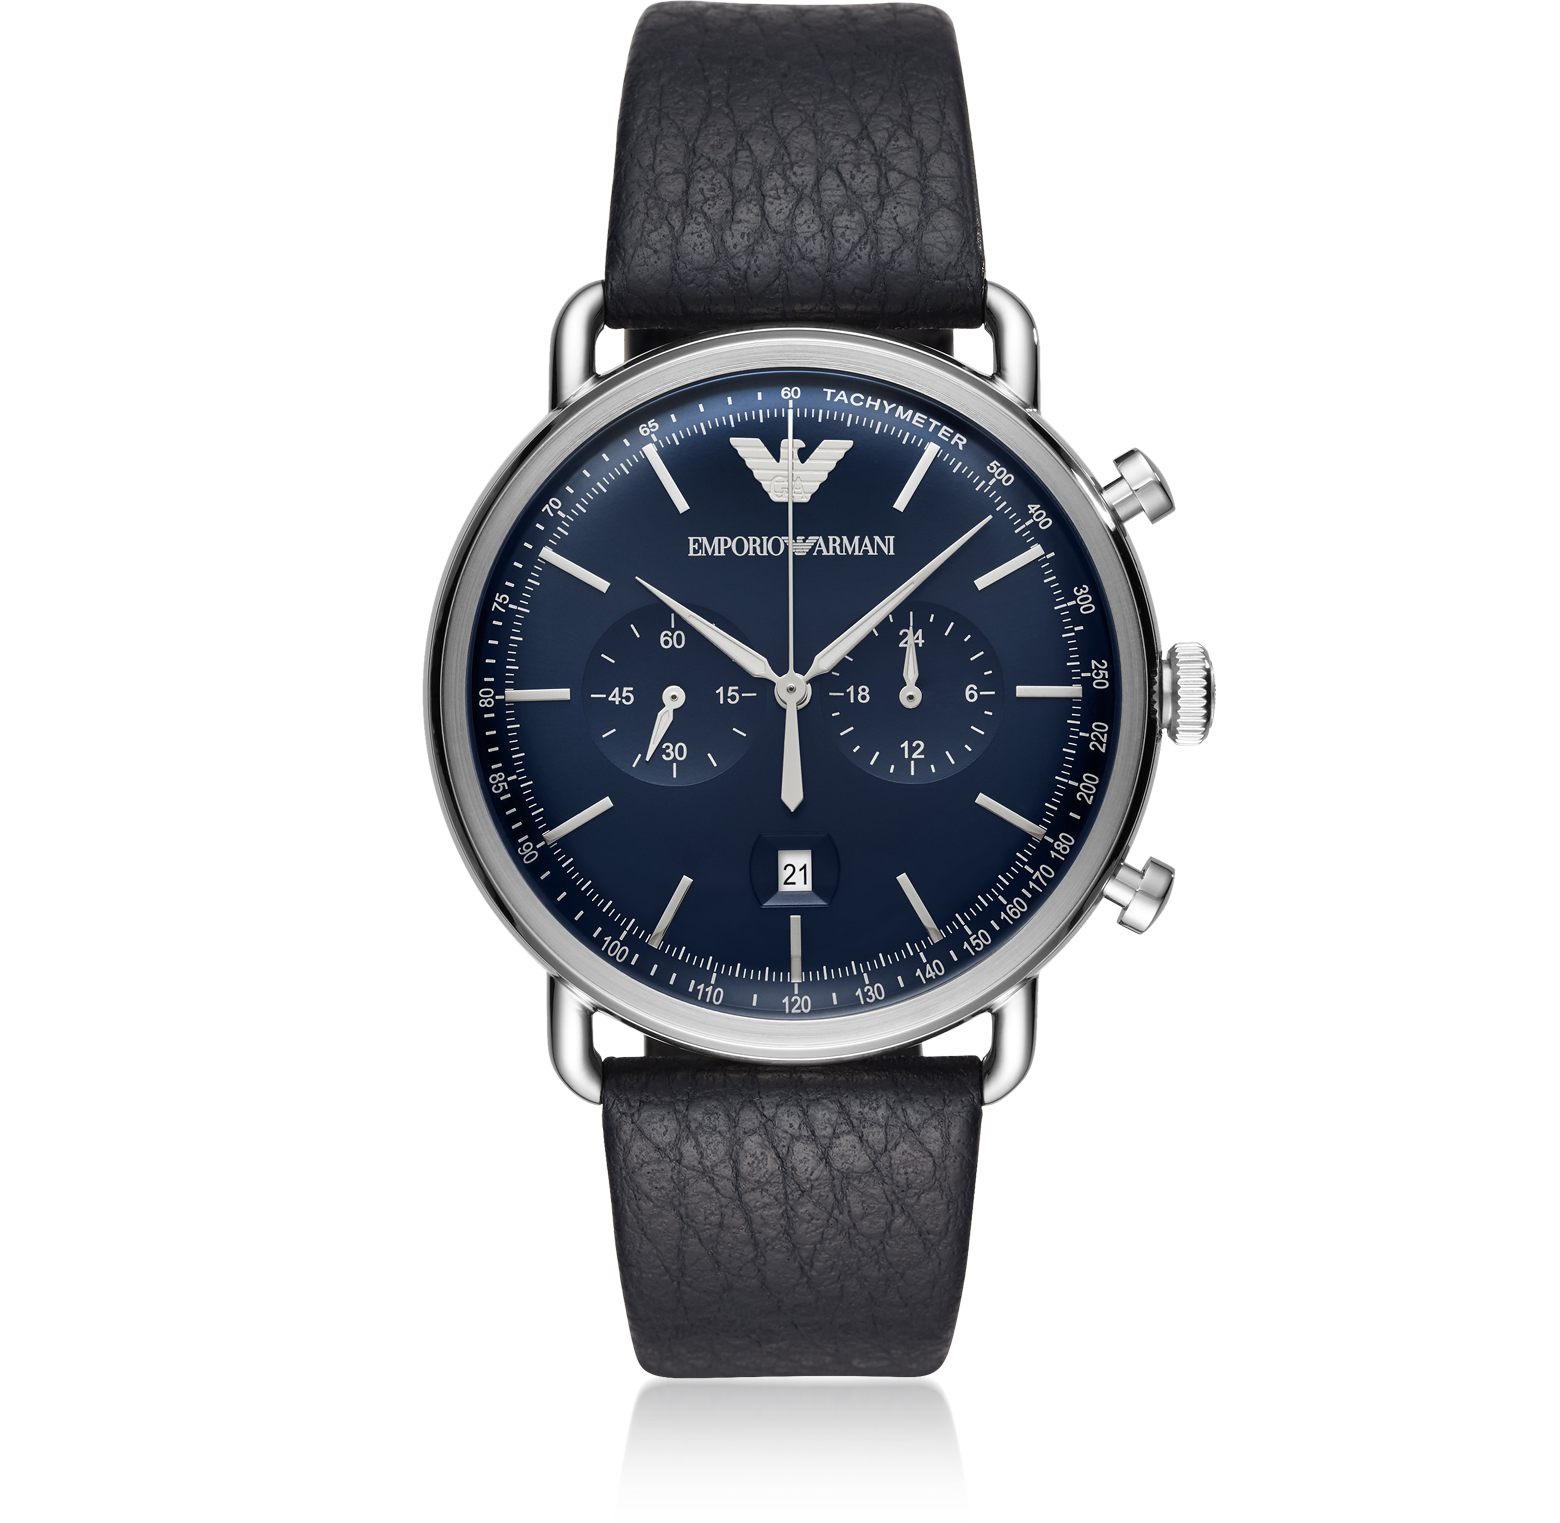 Emporio Armani -- Stainless Steel Men's Watch at FORZIERI Canada